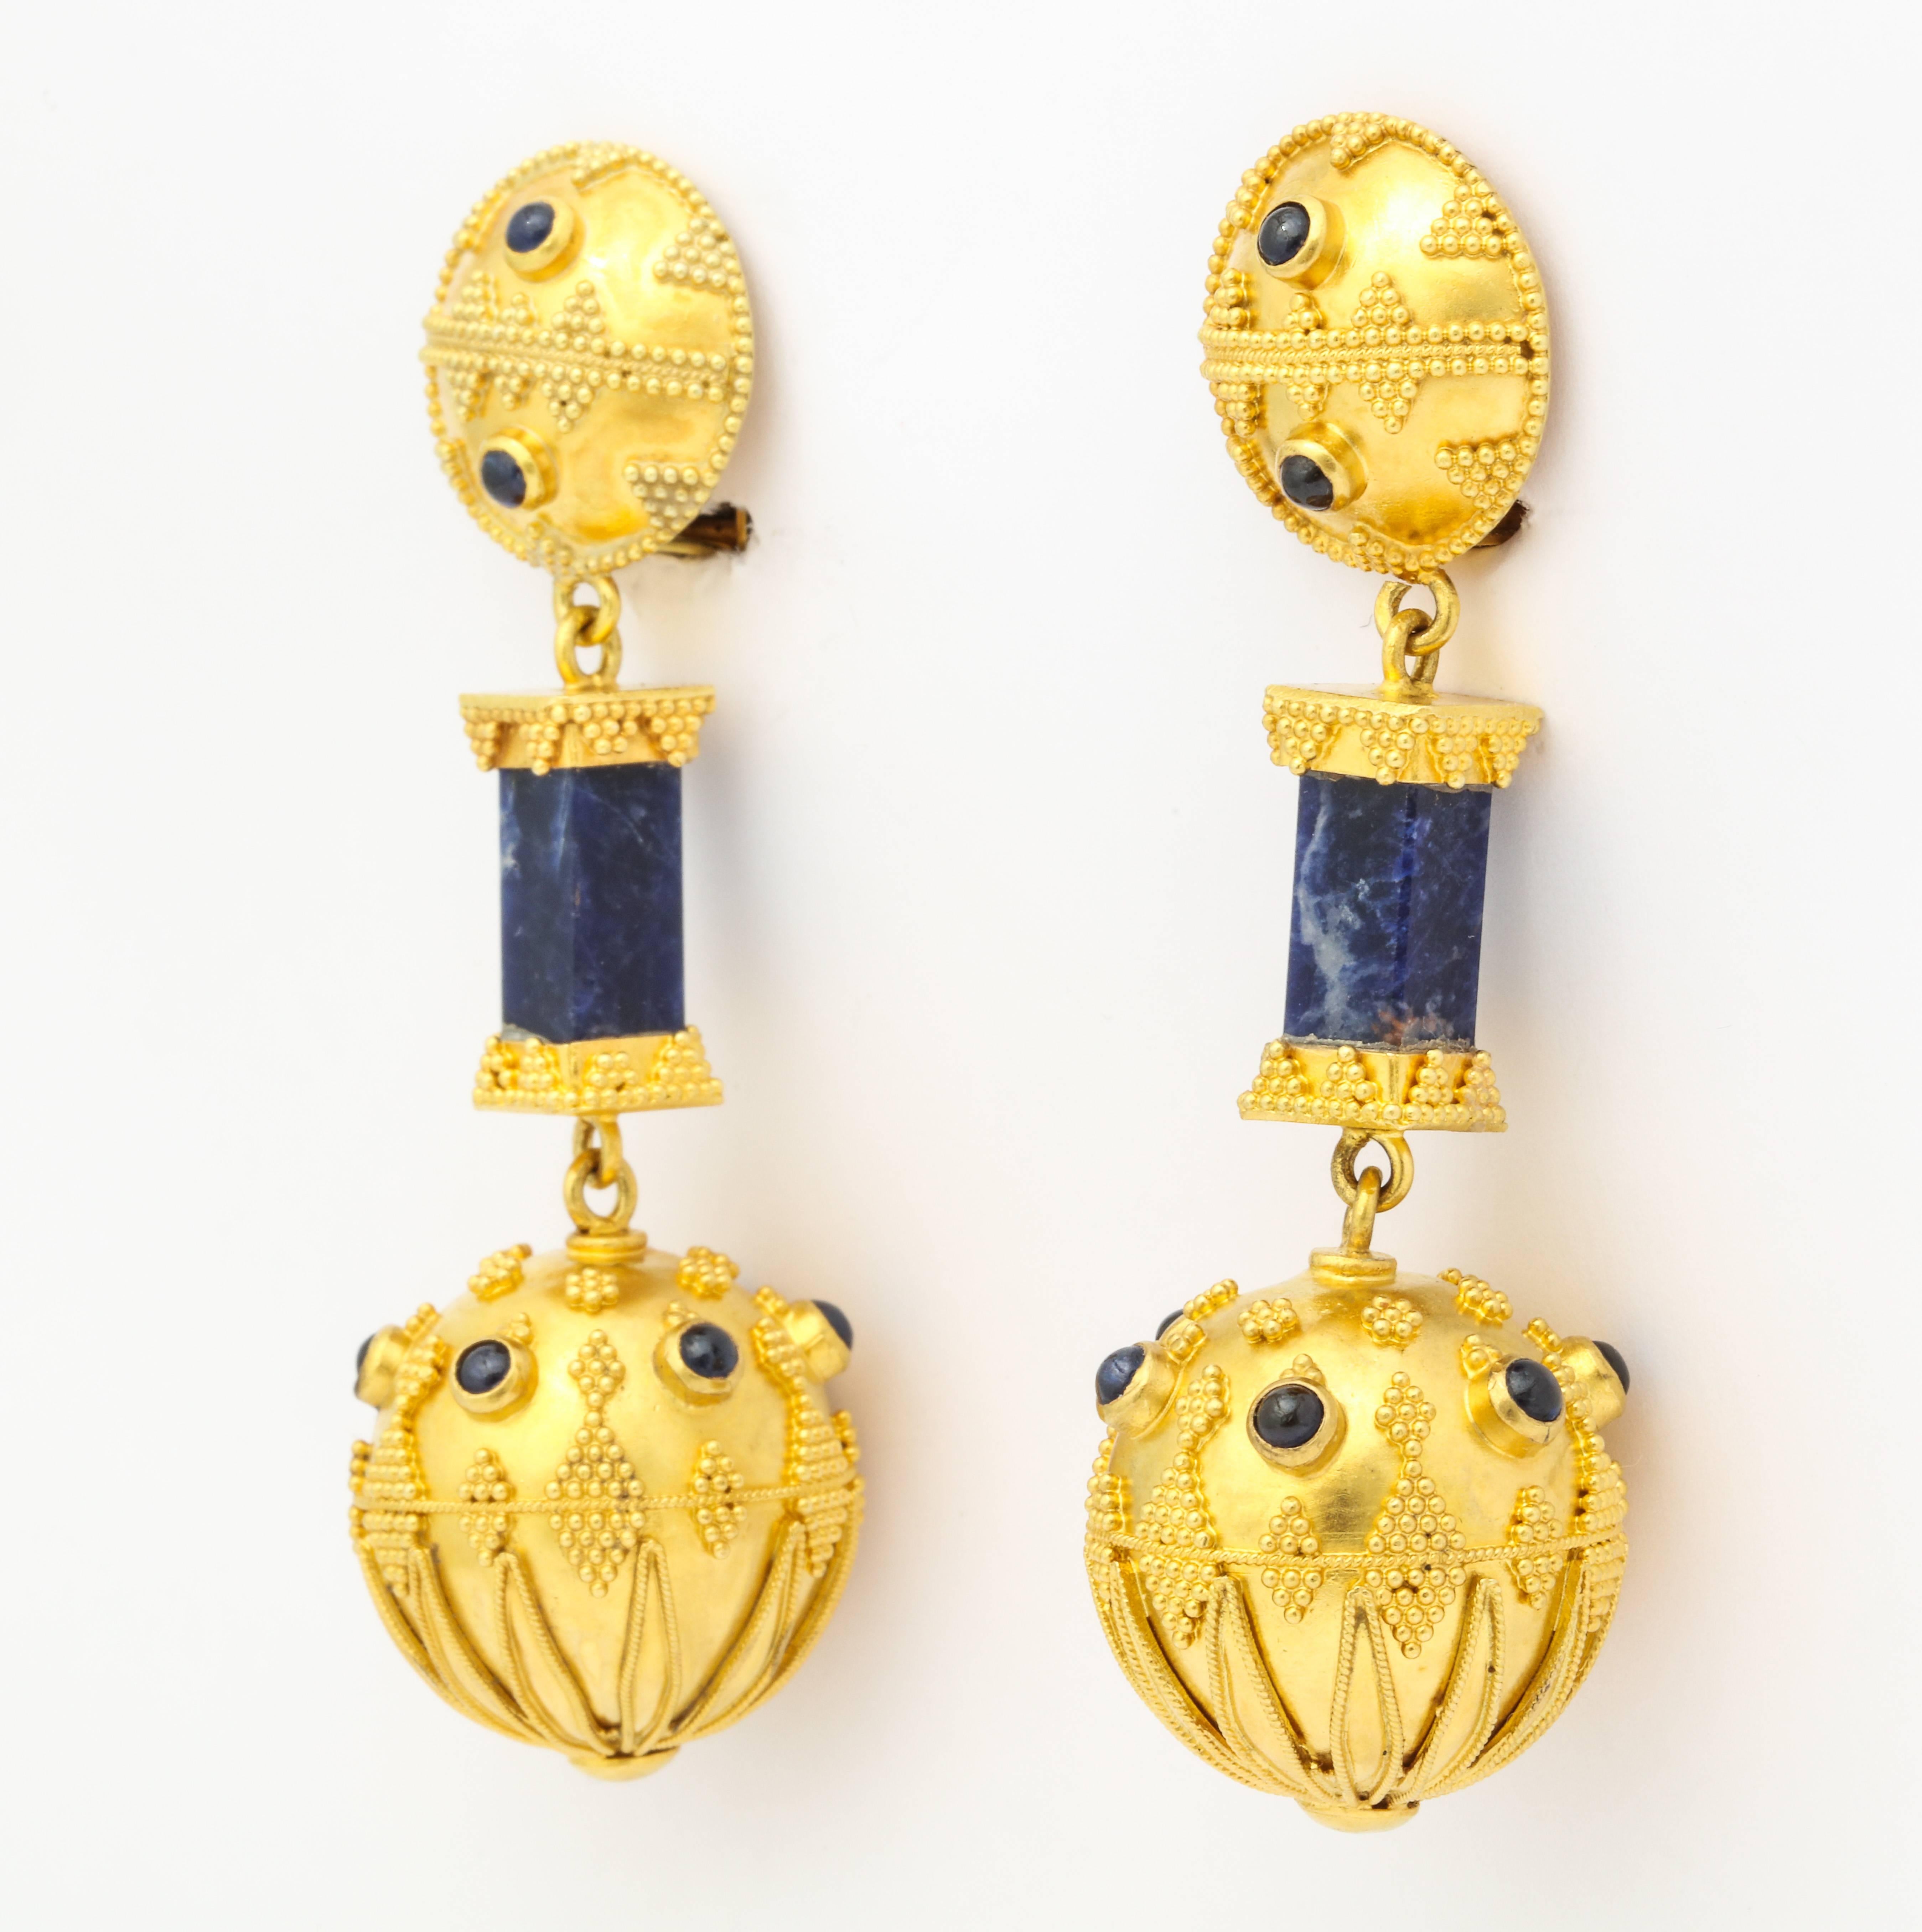 Stunning 1970s earrings recreating the 4th Century Hellenistic Greek style made of 22K gold hung with square bars of rich deep lapis, and gold balls studded with Lapis cabochons, and an overall application of individual grains of gold - a dying